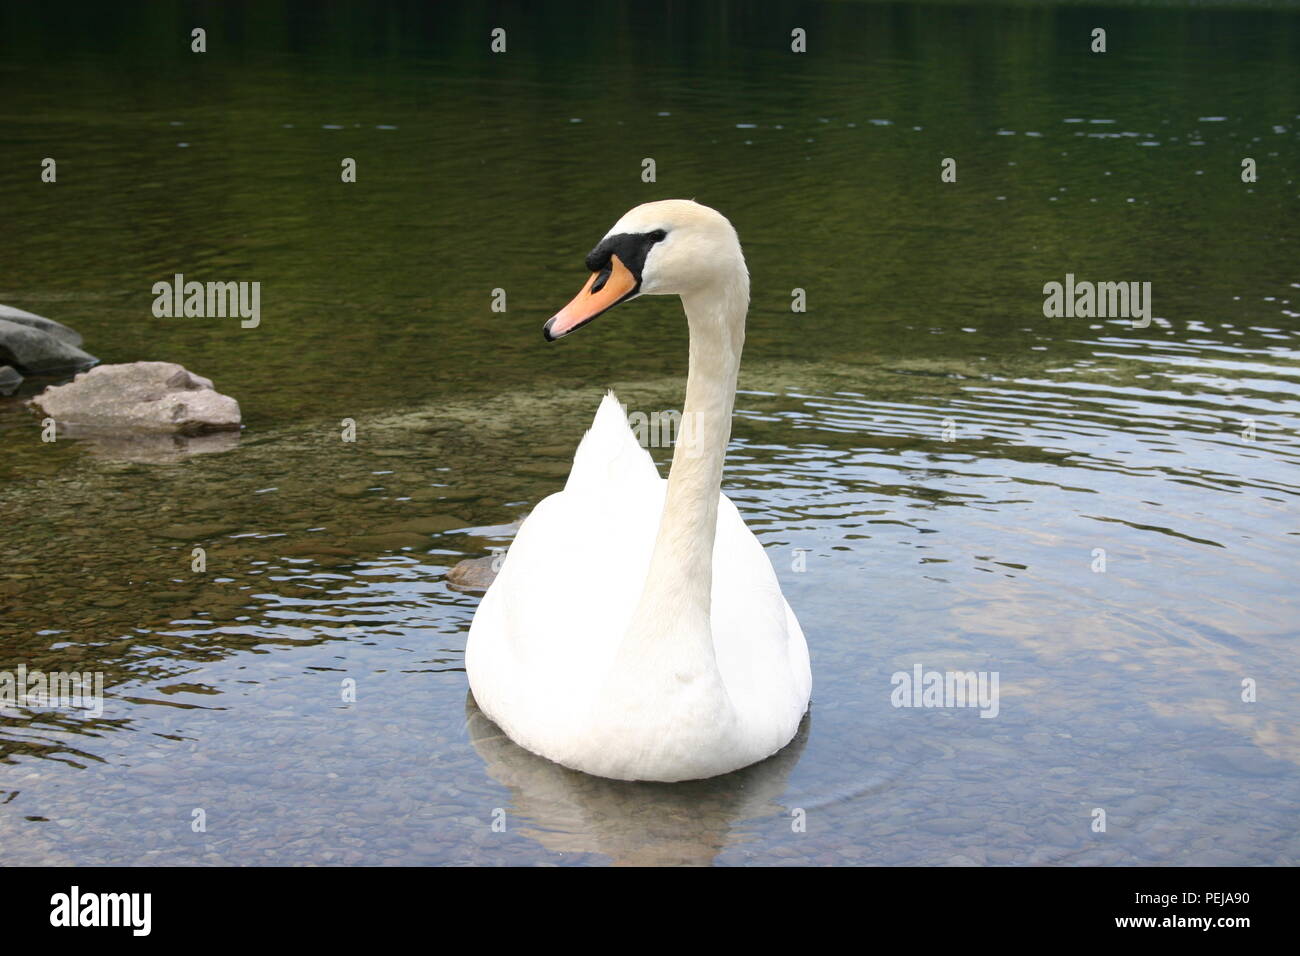 A swan sits on still water Stock Photo